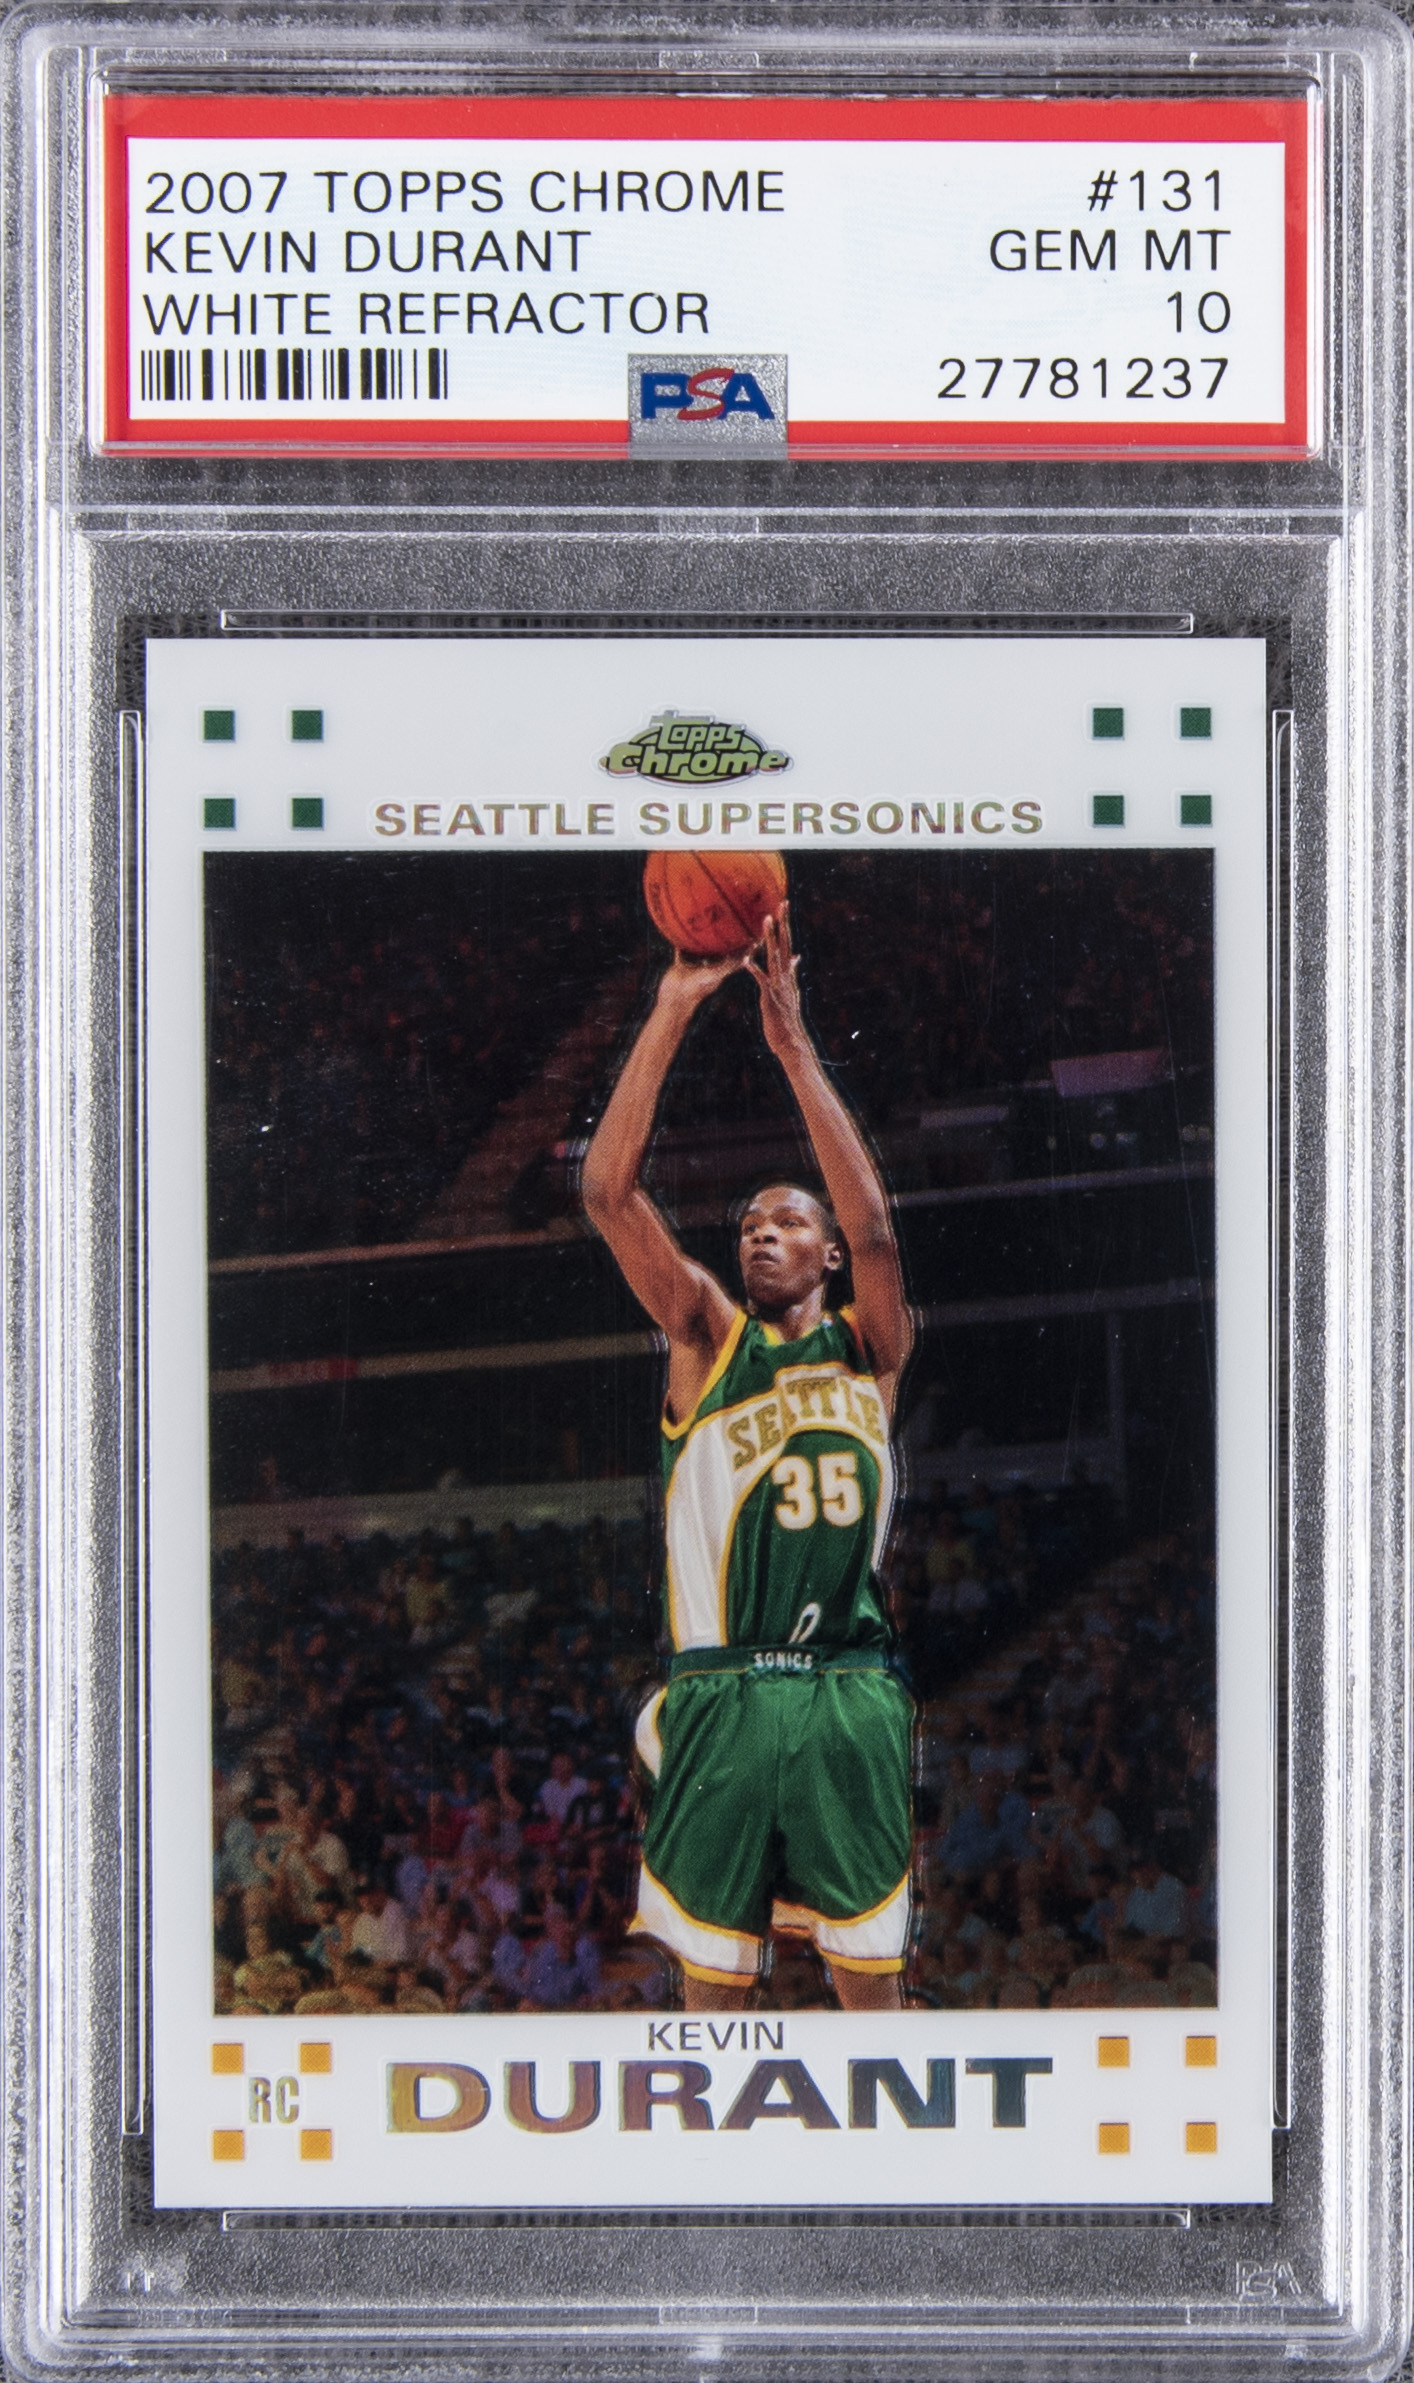 2007-08 Topps Chrome White Refractor #131 Kevin Durant Rookie Card (#84/99) – PSA GEM MT 10